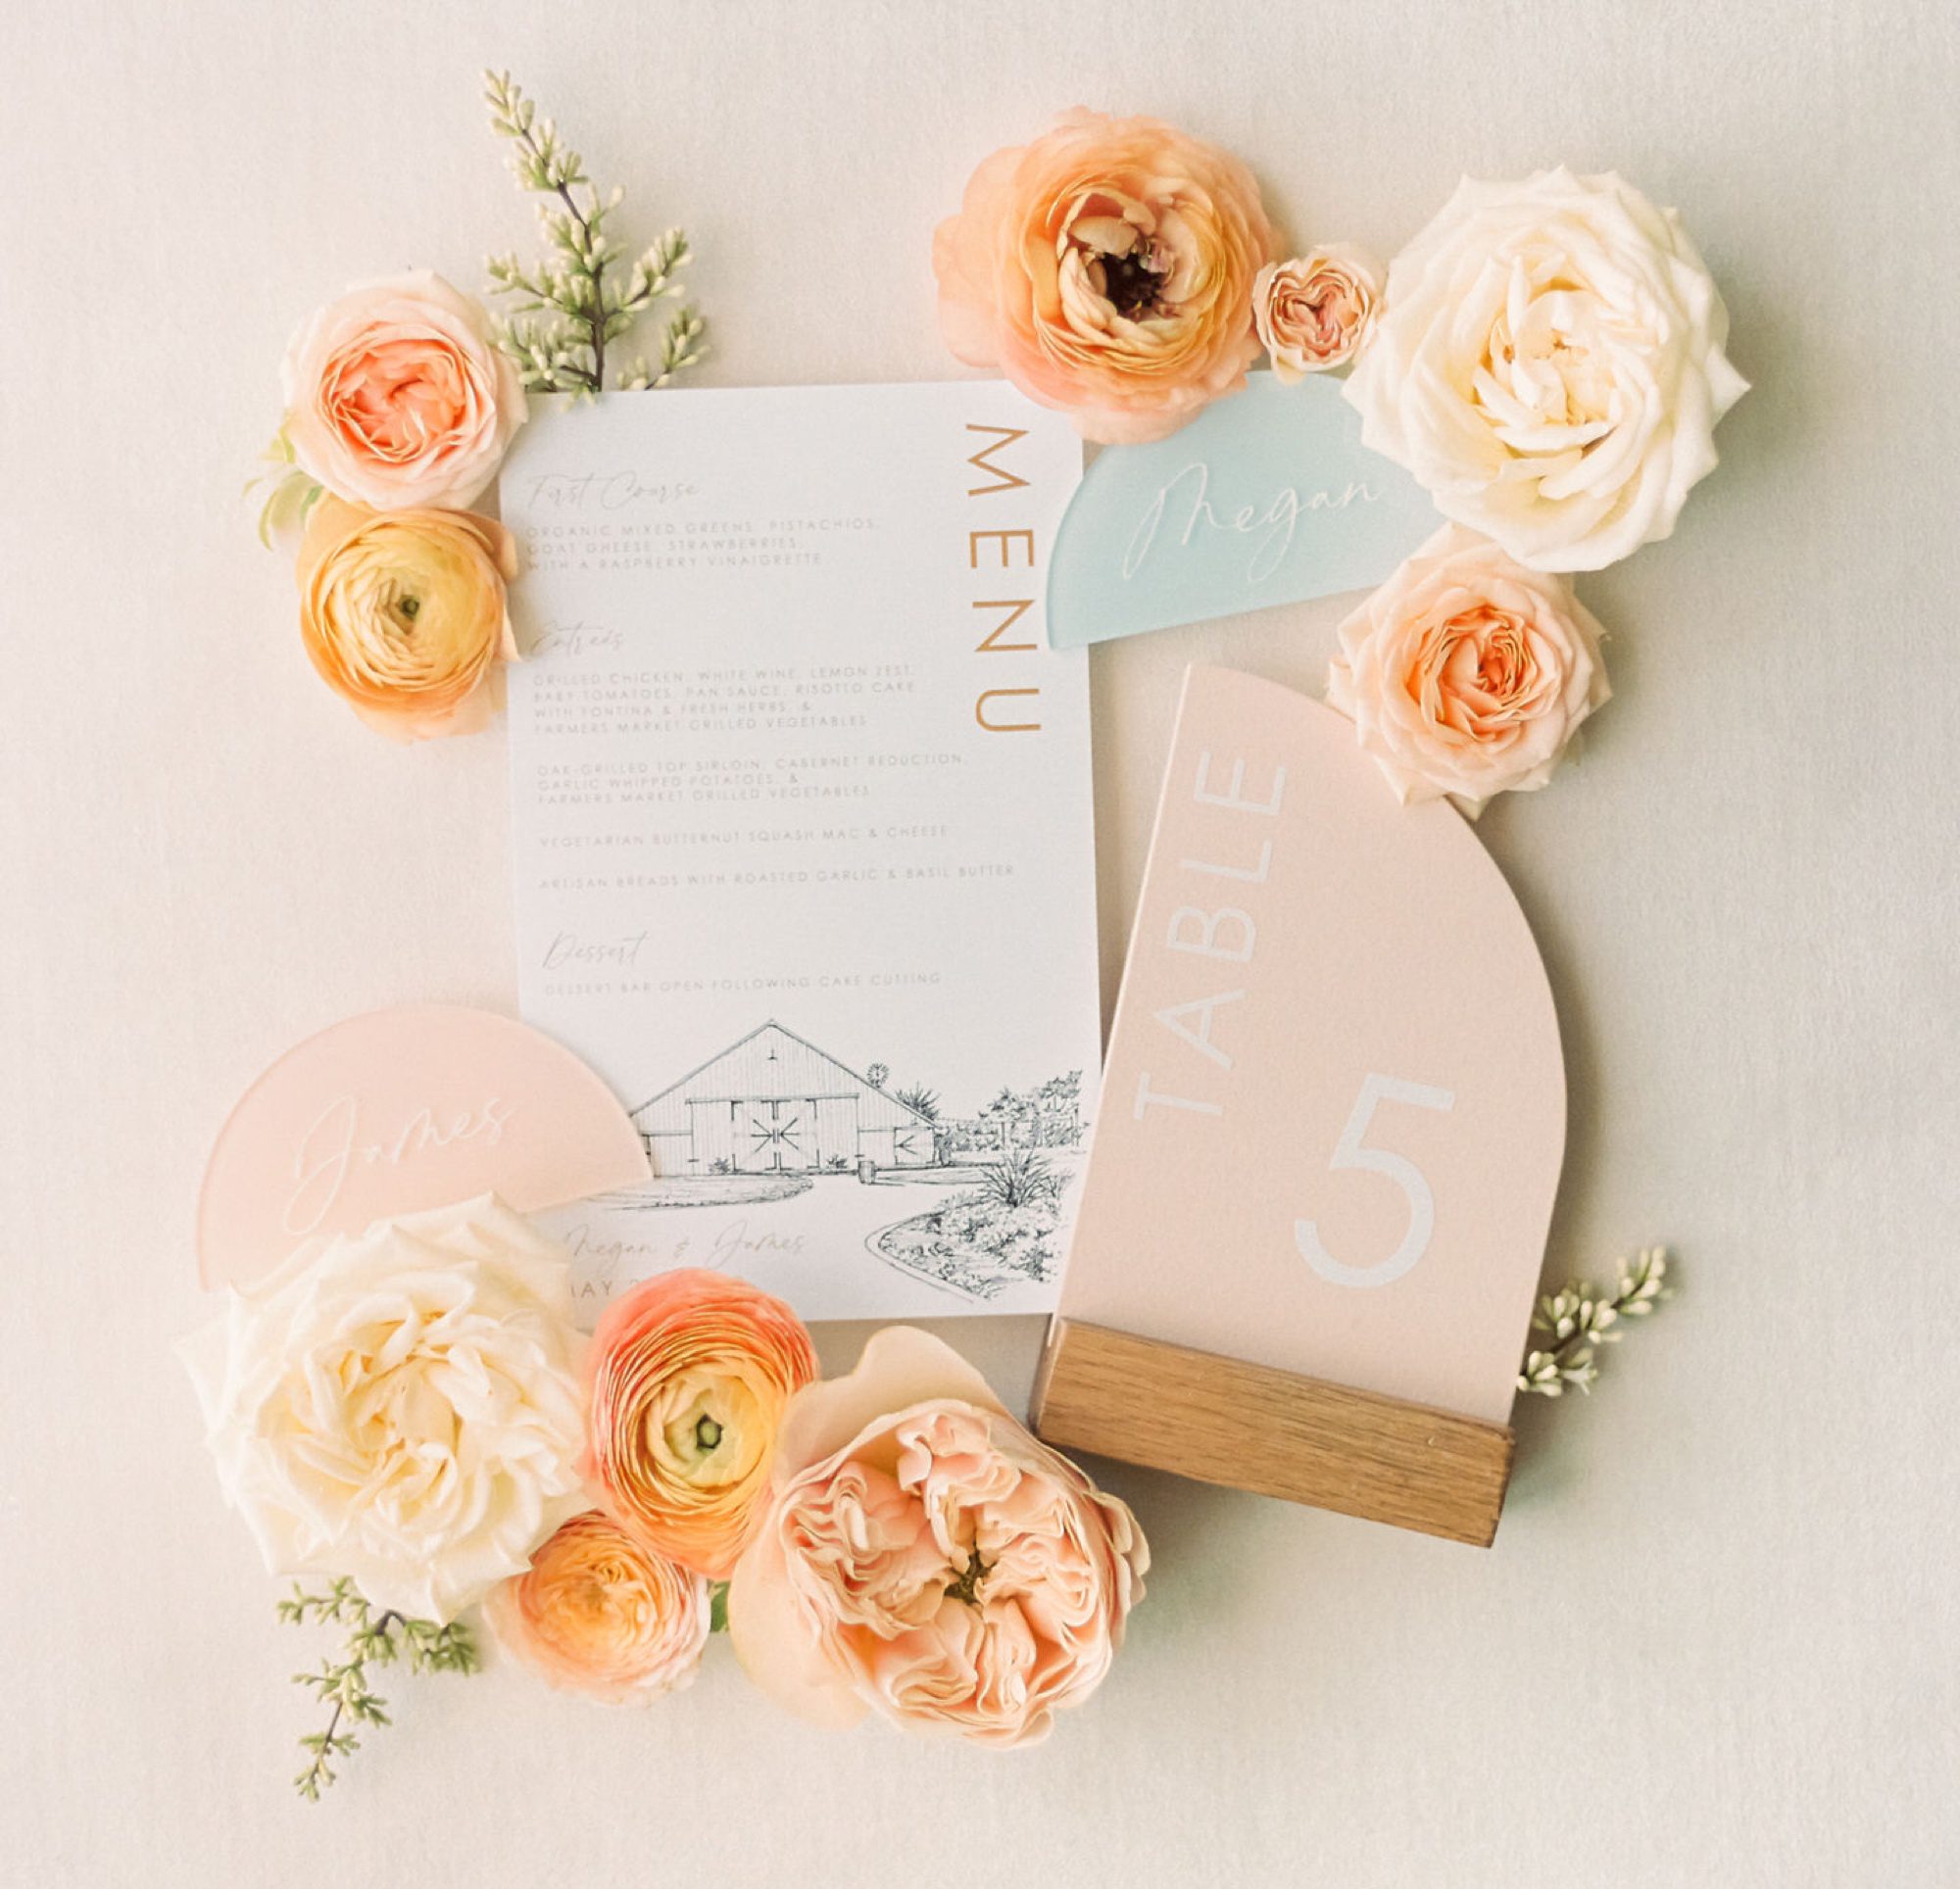 Menu card from Tracy Rossi Design with Elyse Events at the White Barn Edna Valley photographed by san luis obispo wedding photographers jessica sofranko